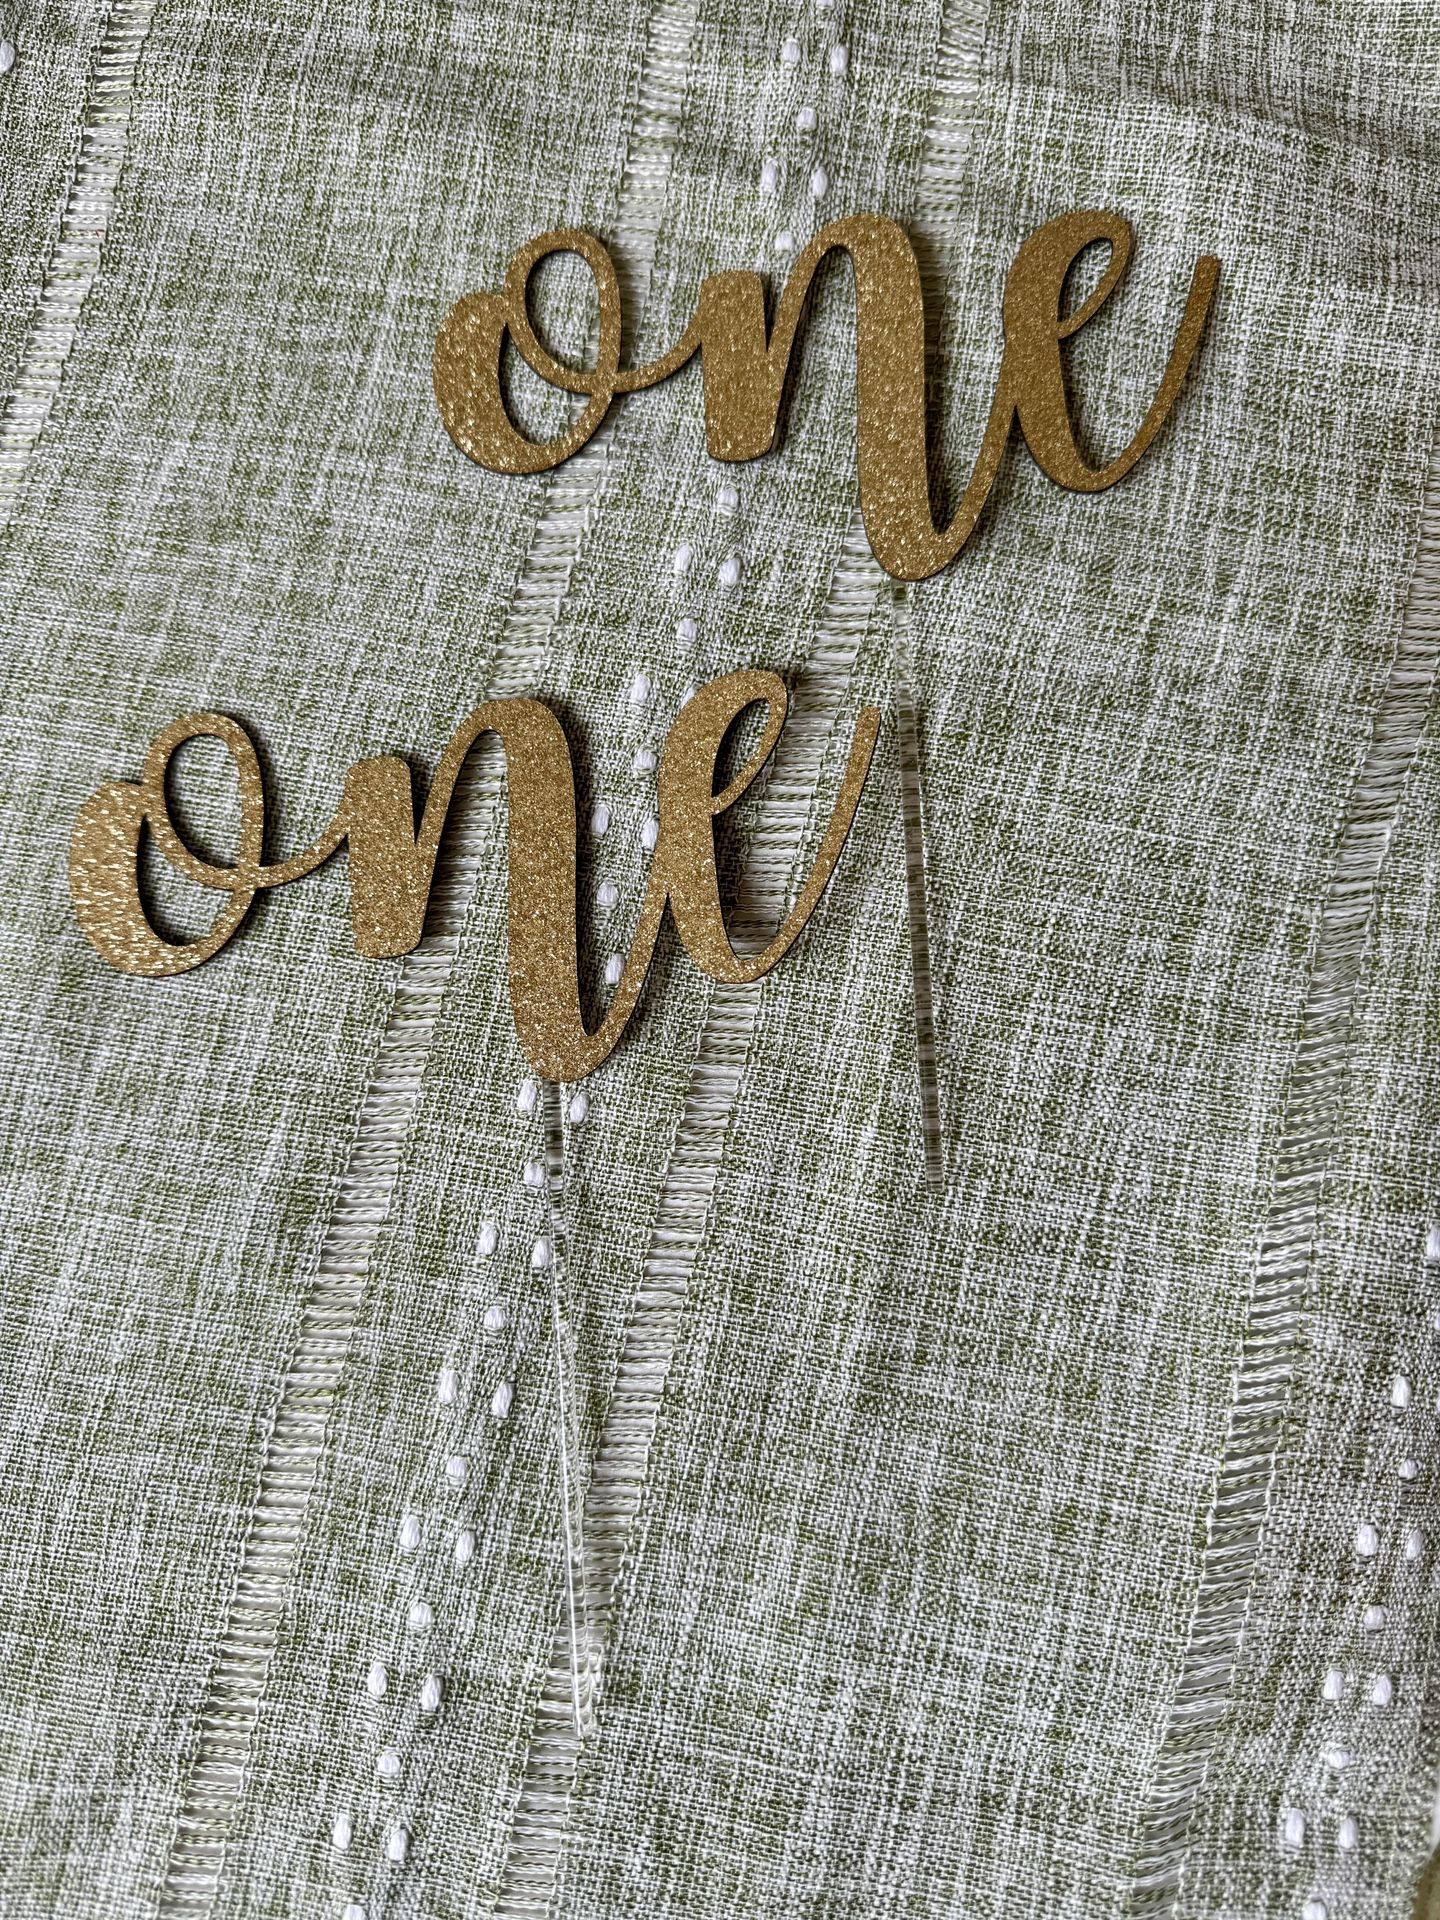 Gold “one” Cake Topper